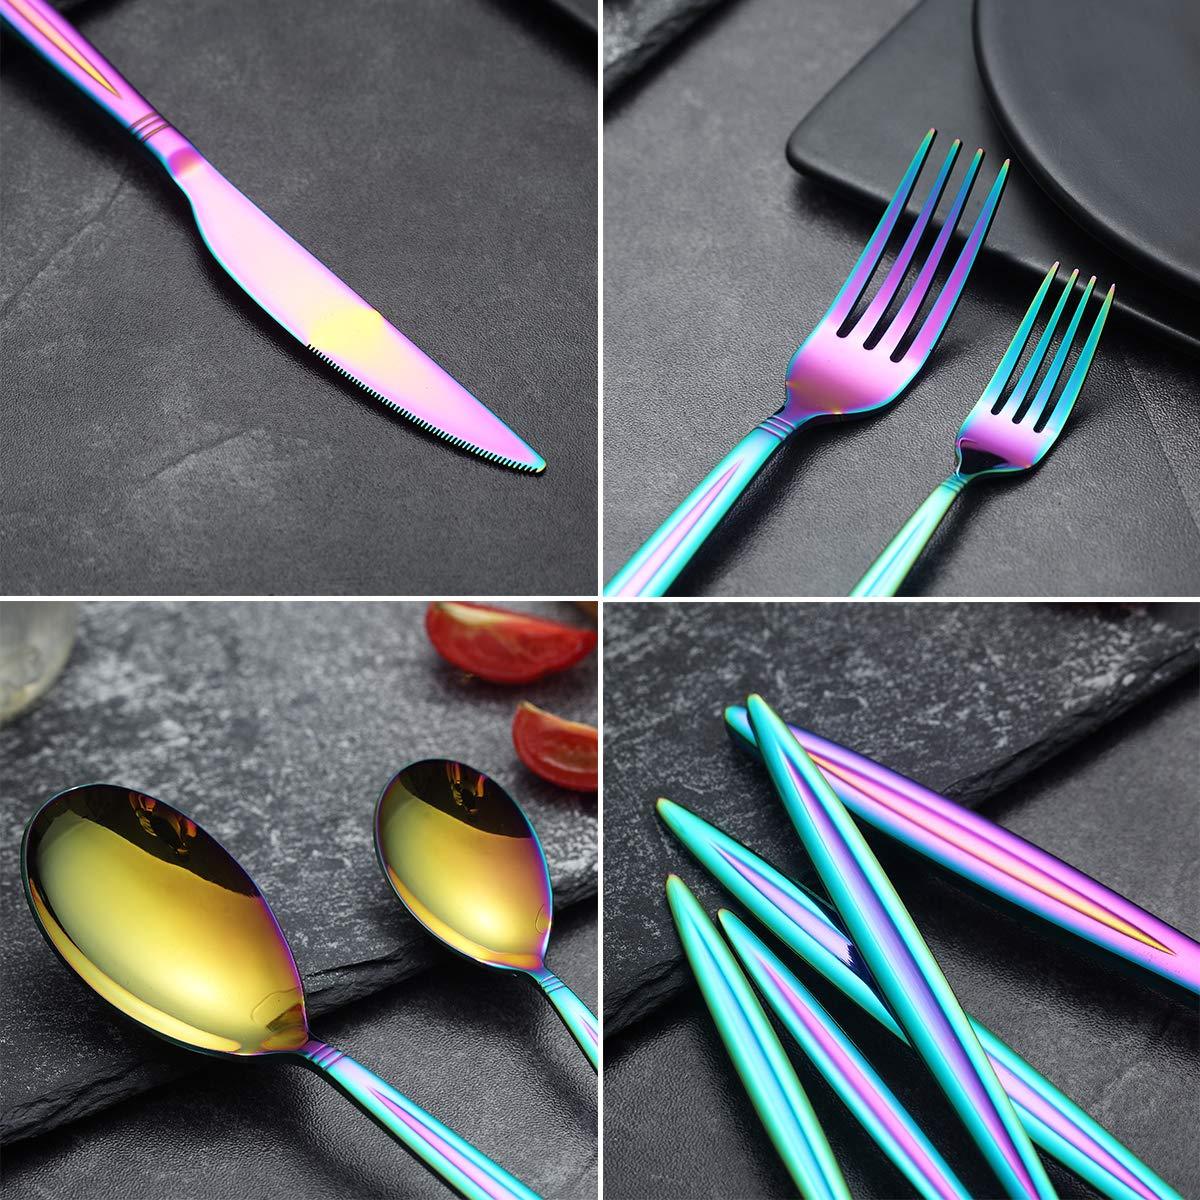 US$ 54.99 - 30-piece colorful cutlery set, service set for 6 (shiny ...